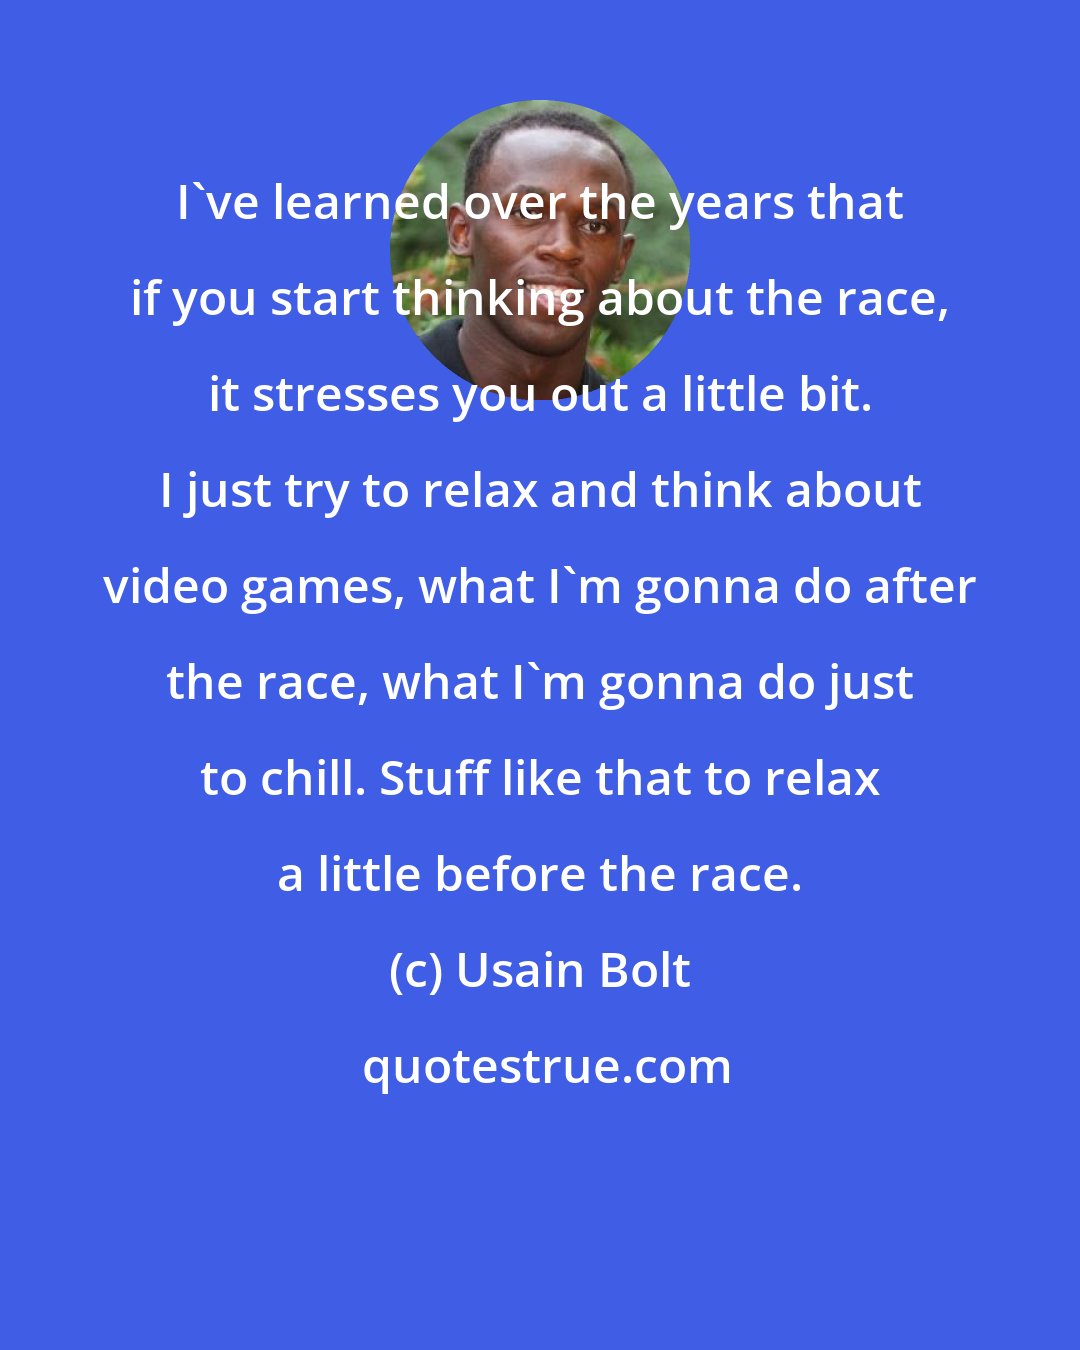 Usain Bolt: I've learned over the years that if you start thinking about the race, it stresses you out a little bit. I just try to relax and think about video games, what I'm gonna do after the race, what I'm gonna do just to chill. Stuff like that to relax a little before the race.